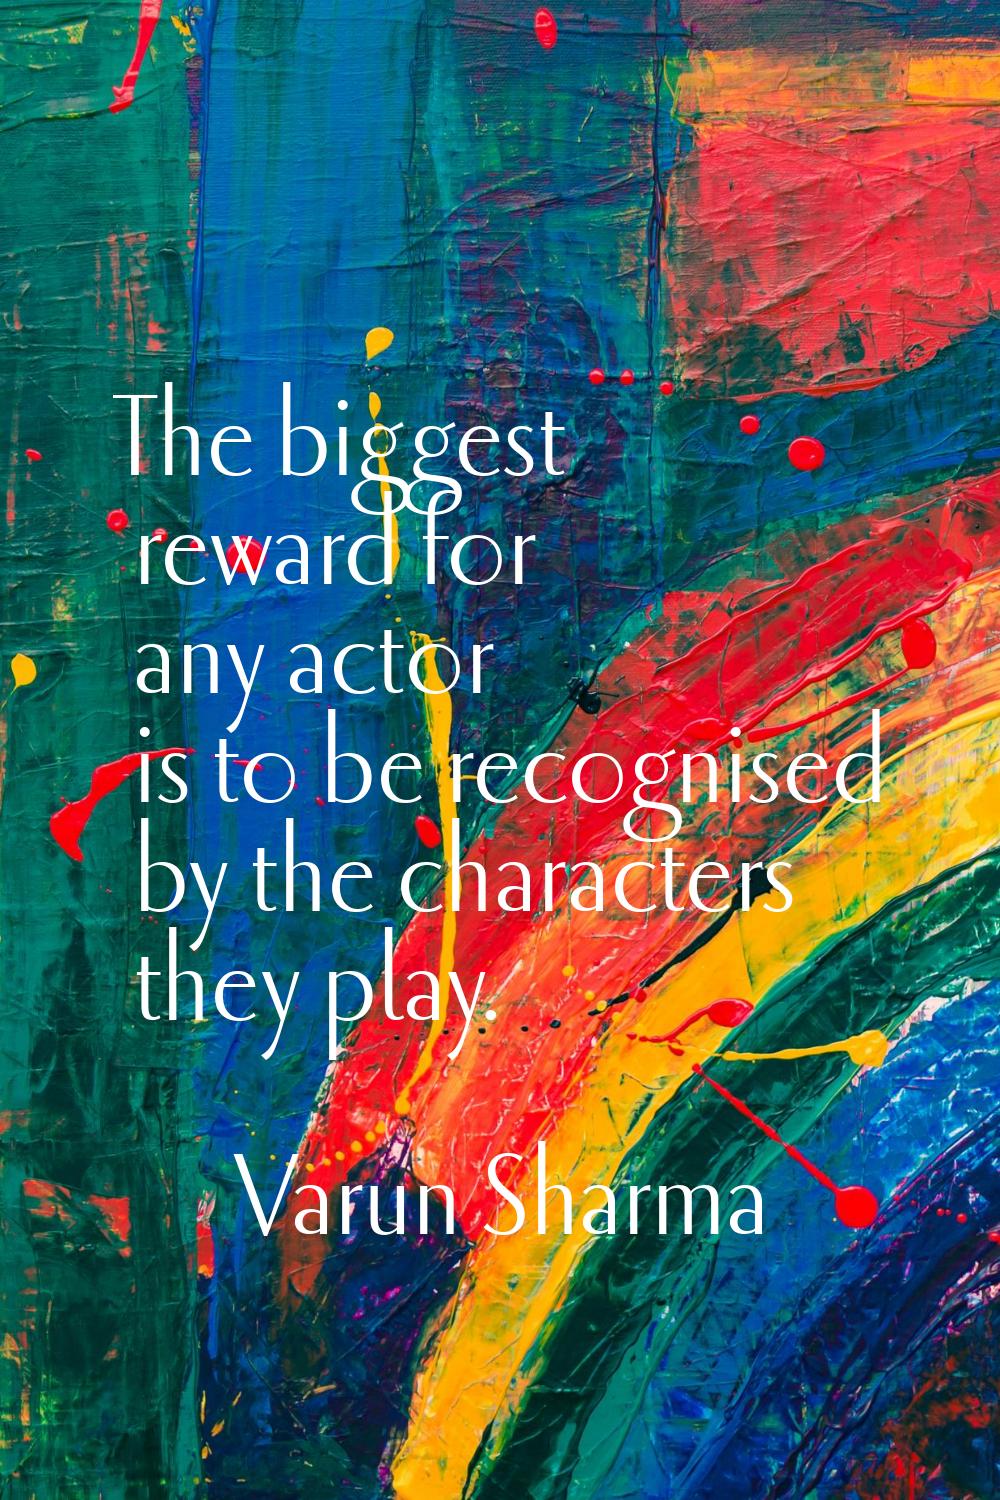 The biggest reward for any actor is to be recognised by the characters they play.